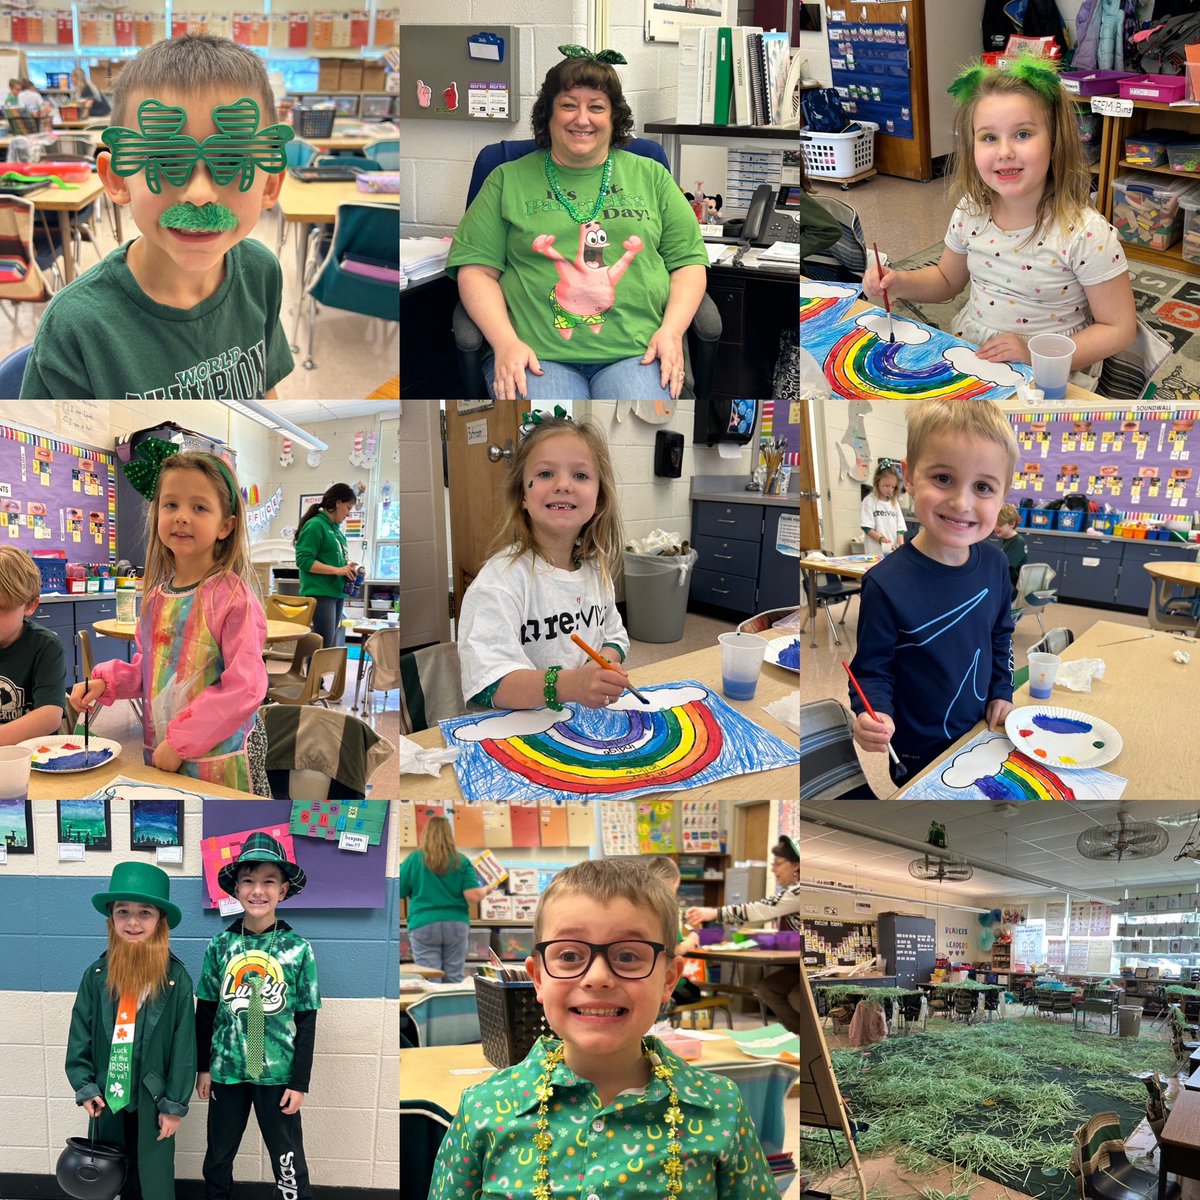 @sellersvillees was filled with silly shenanigans and festive friends!! ☘️@PennridgeSD